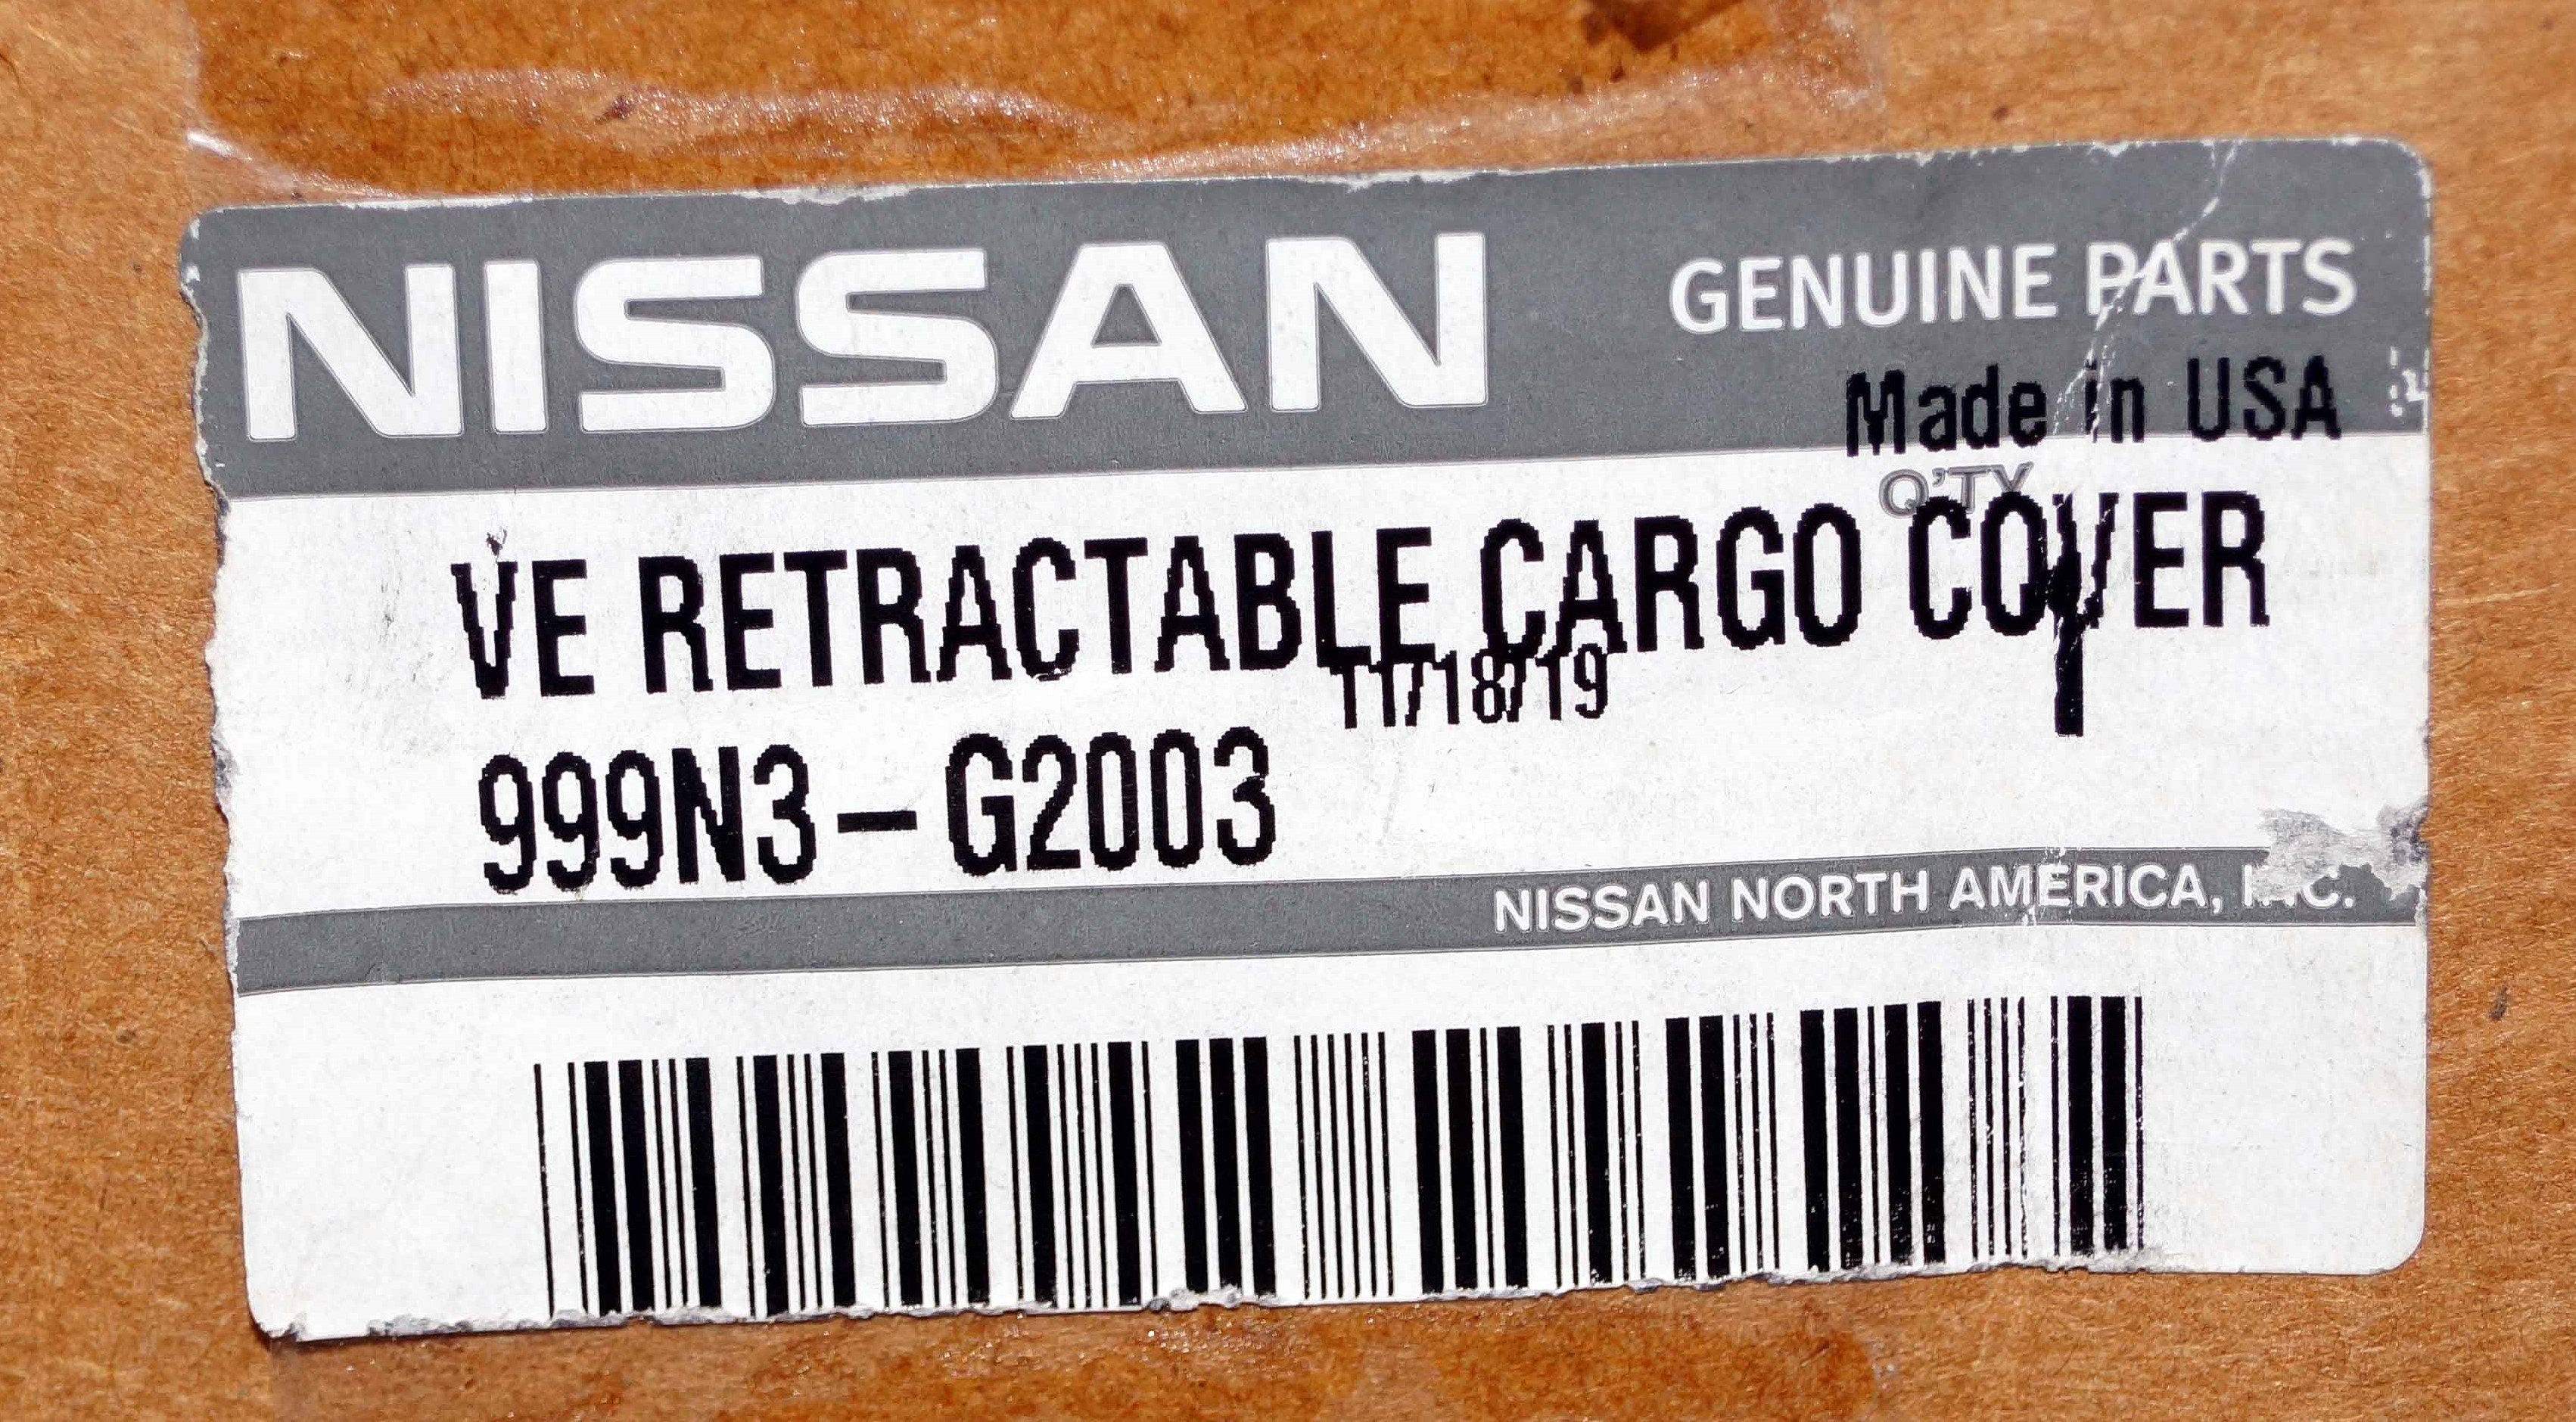 Genuine OEM 999N3G2003 Nissan Rear Retractable Cargo Area Cover Privacy Shade - image 3